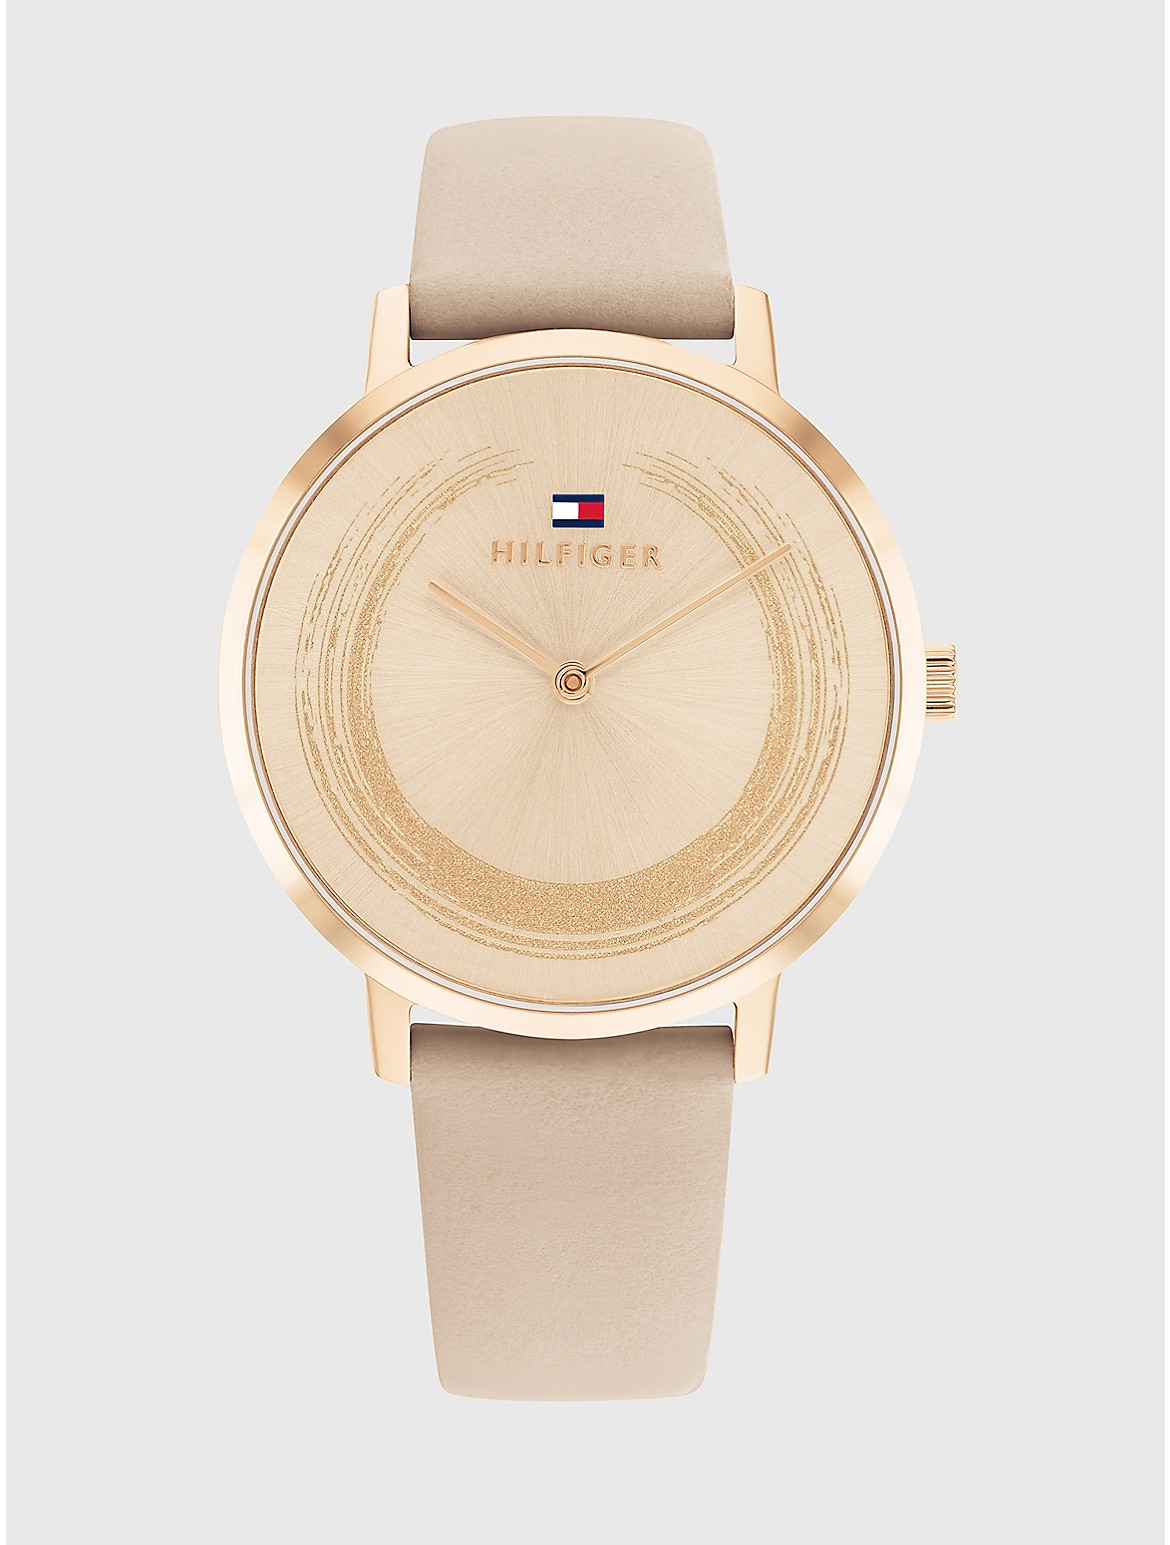 Tommy Hilfiger Women's Dress Watch with Taupe Leather Strap - Metallic